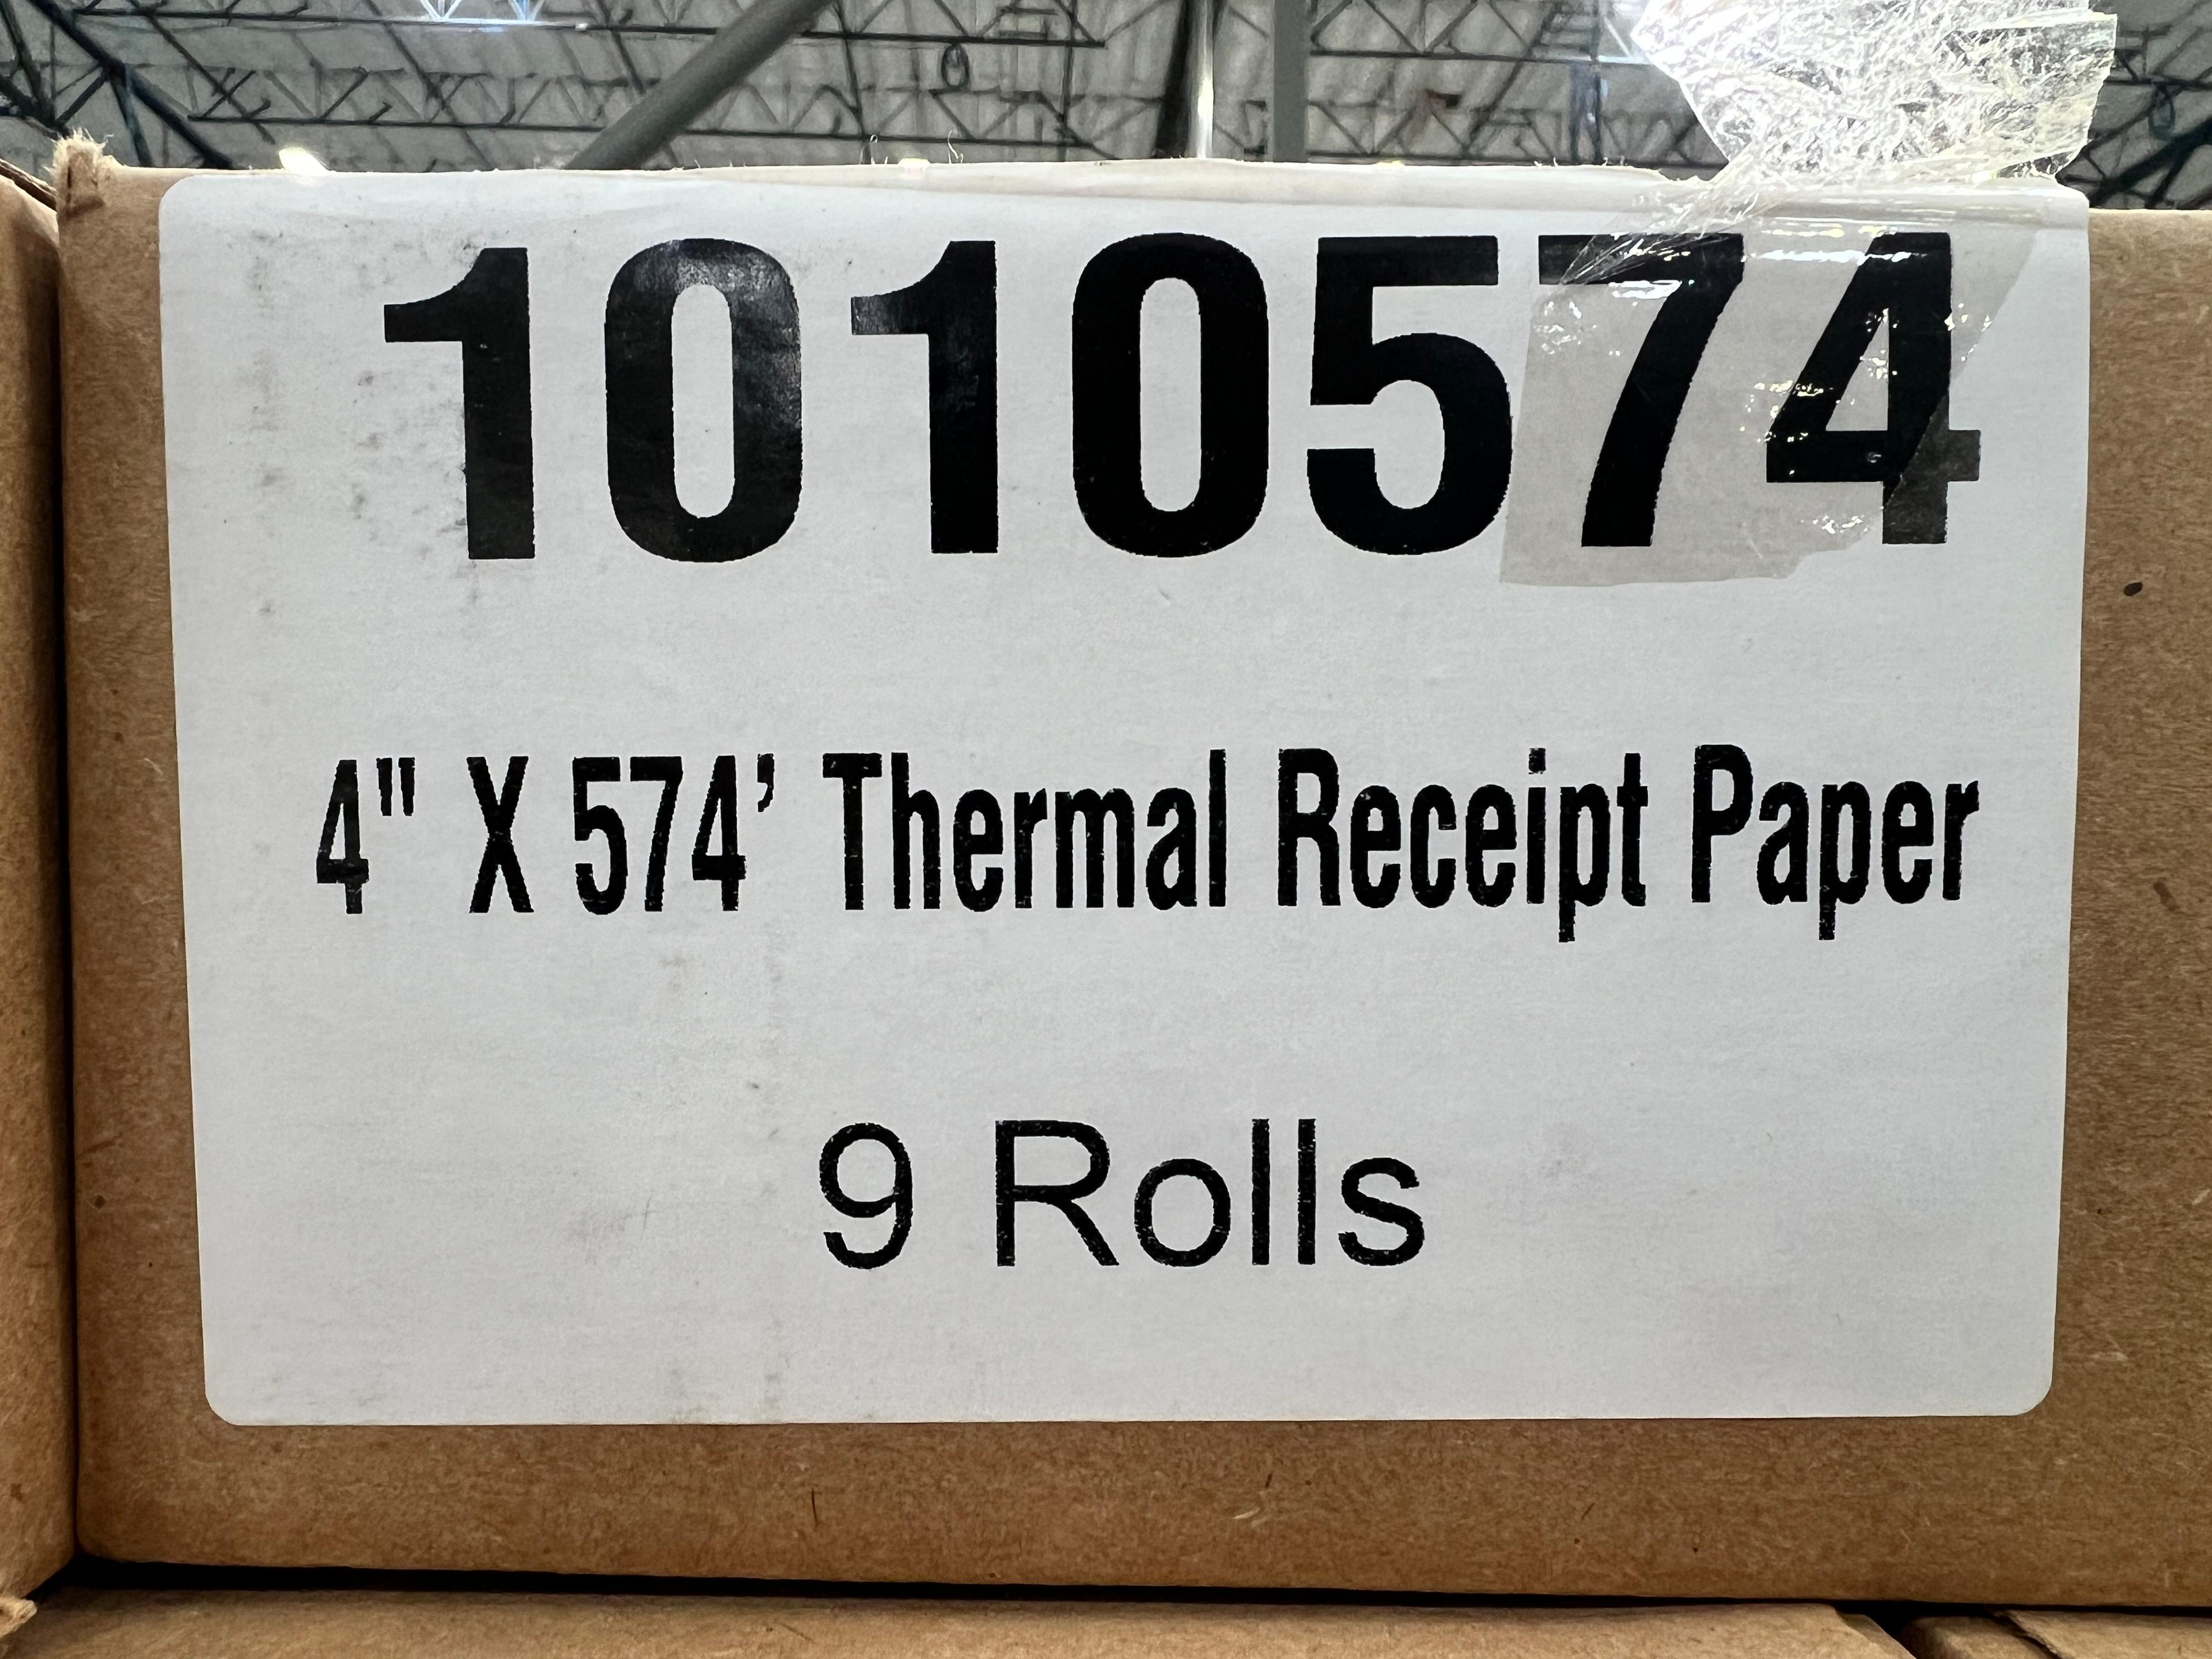 Thermal Receipt Paper 4" X 574'